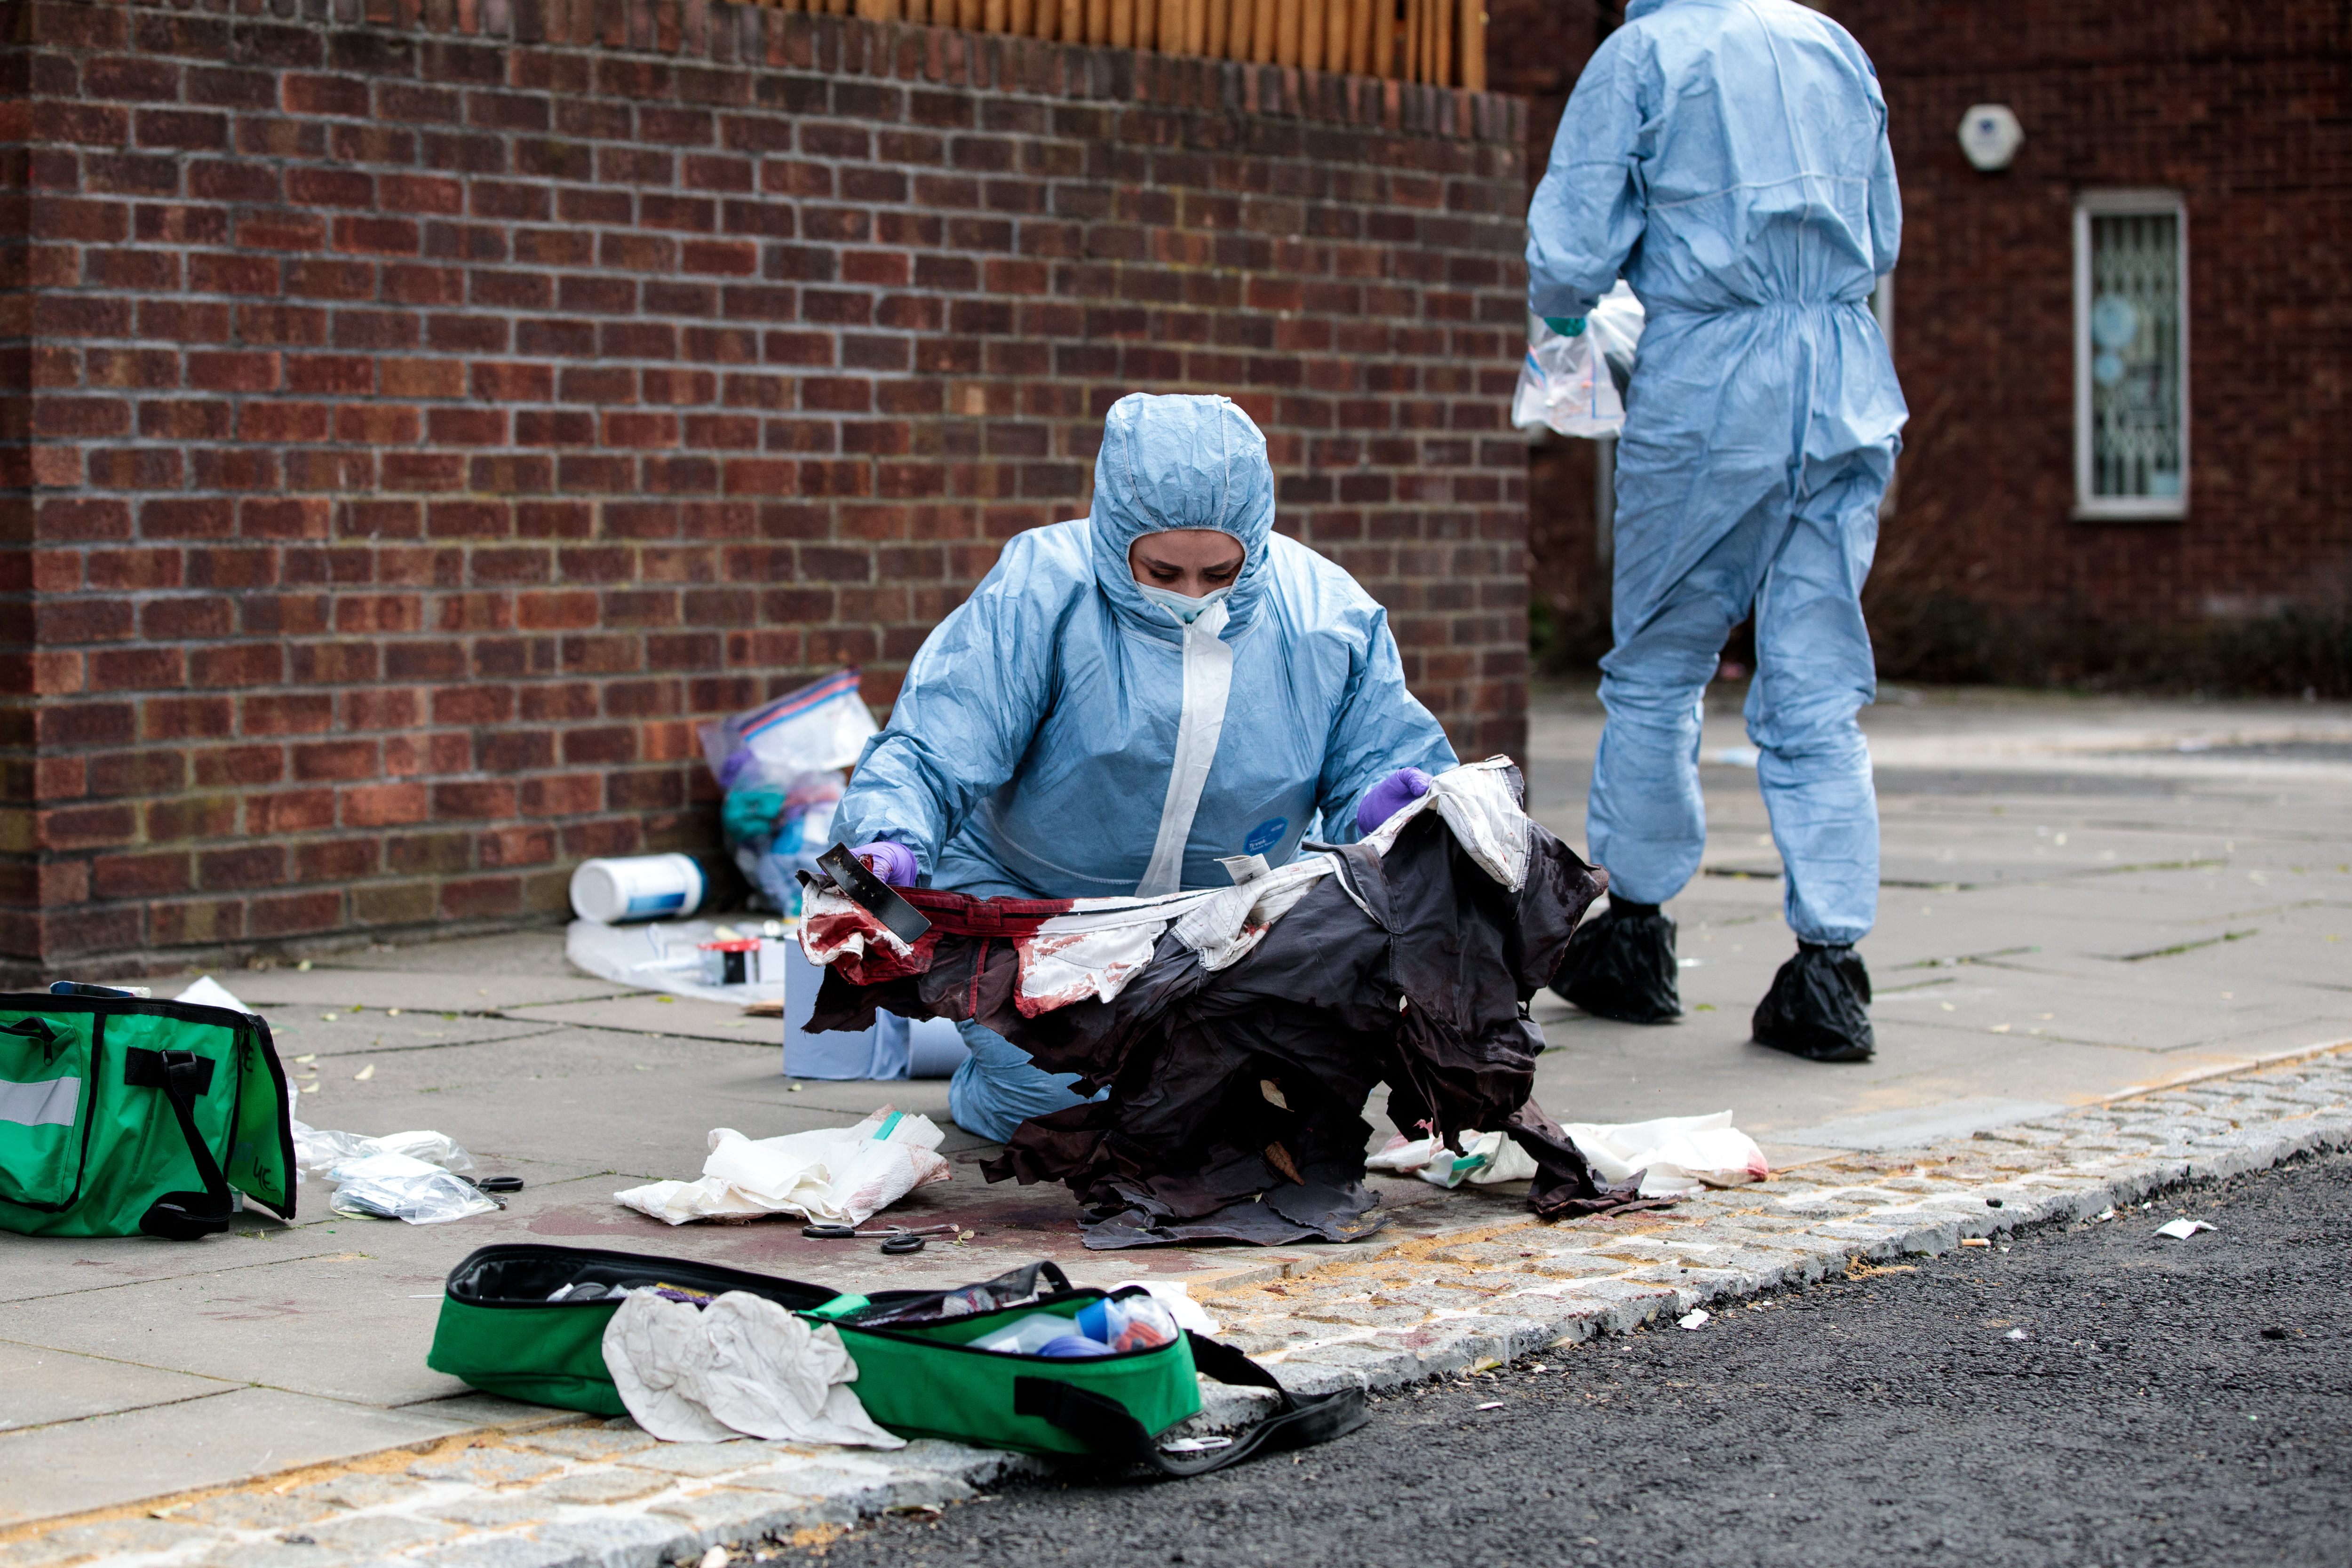 LONDON, ENGLAND - MARCH 31: Forensics teams work at the scene of a stabbing in Edmonton on March 31, 2019 in London, England. Four people have been stabbed in a spate of knife attacks in North London over the weekend. (Photo by Jack Taylor/Getty Images)